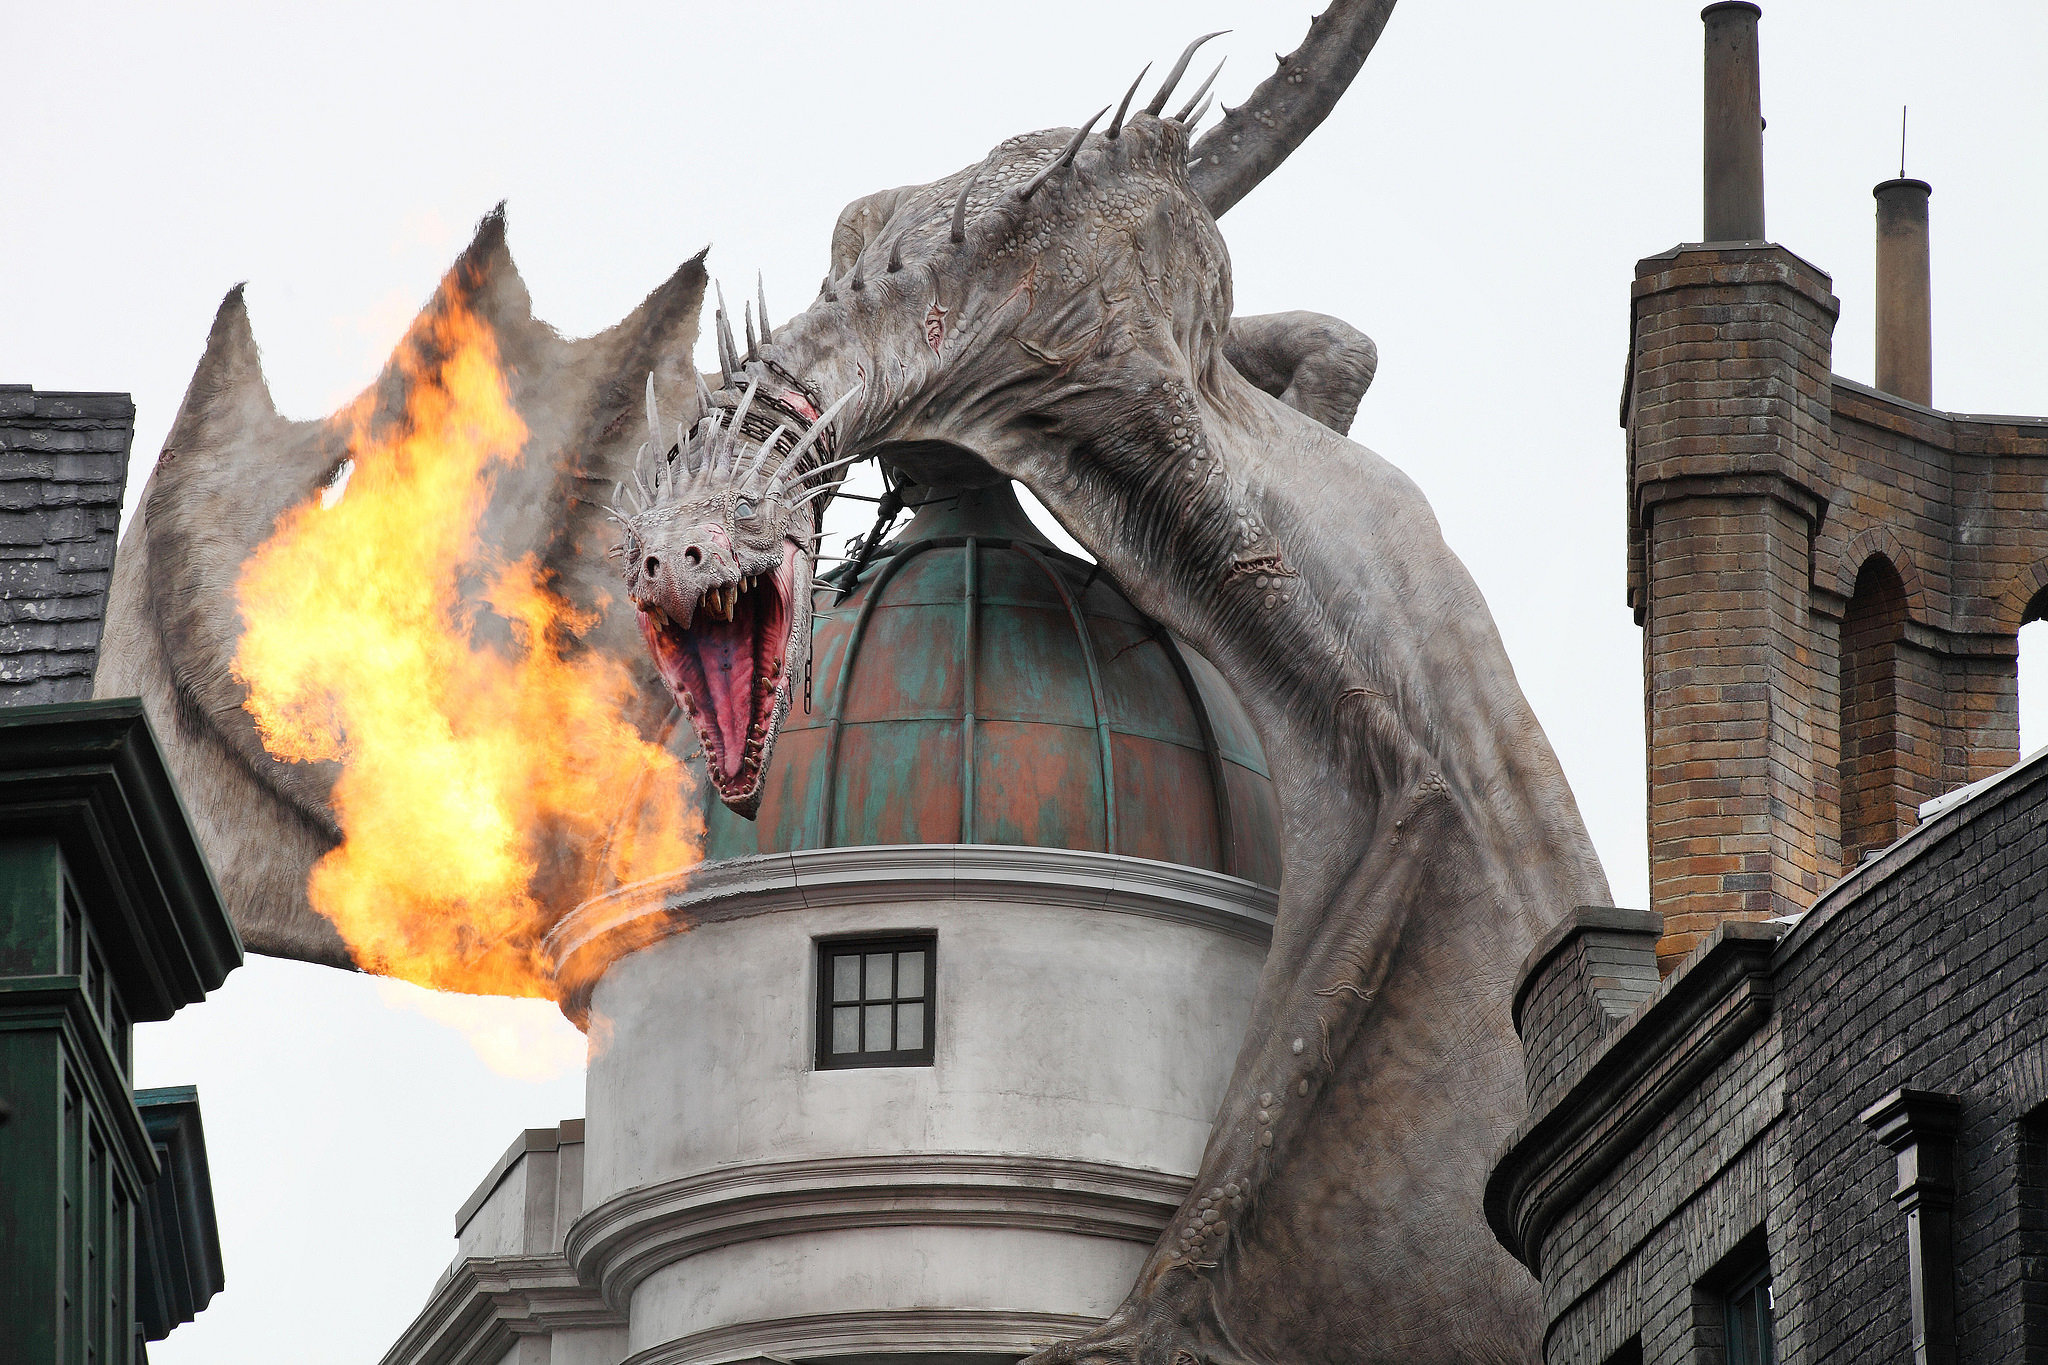 The Gringotts dragon at The Wizarding World of Harry Potter breathes